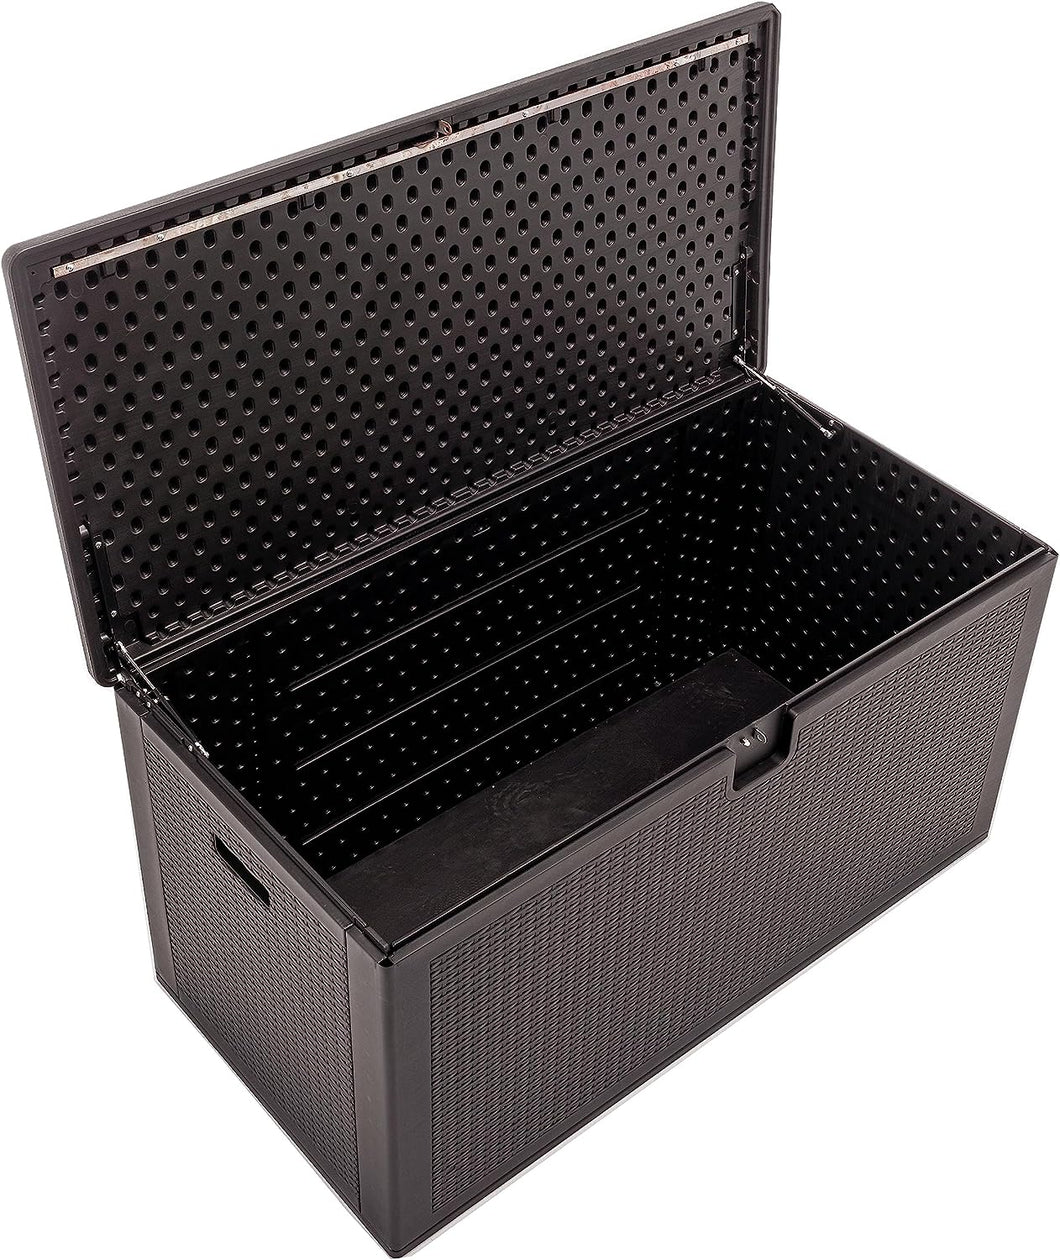 Gallon All Weather Large Deck Box Lockable Storage Container Patio